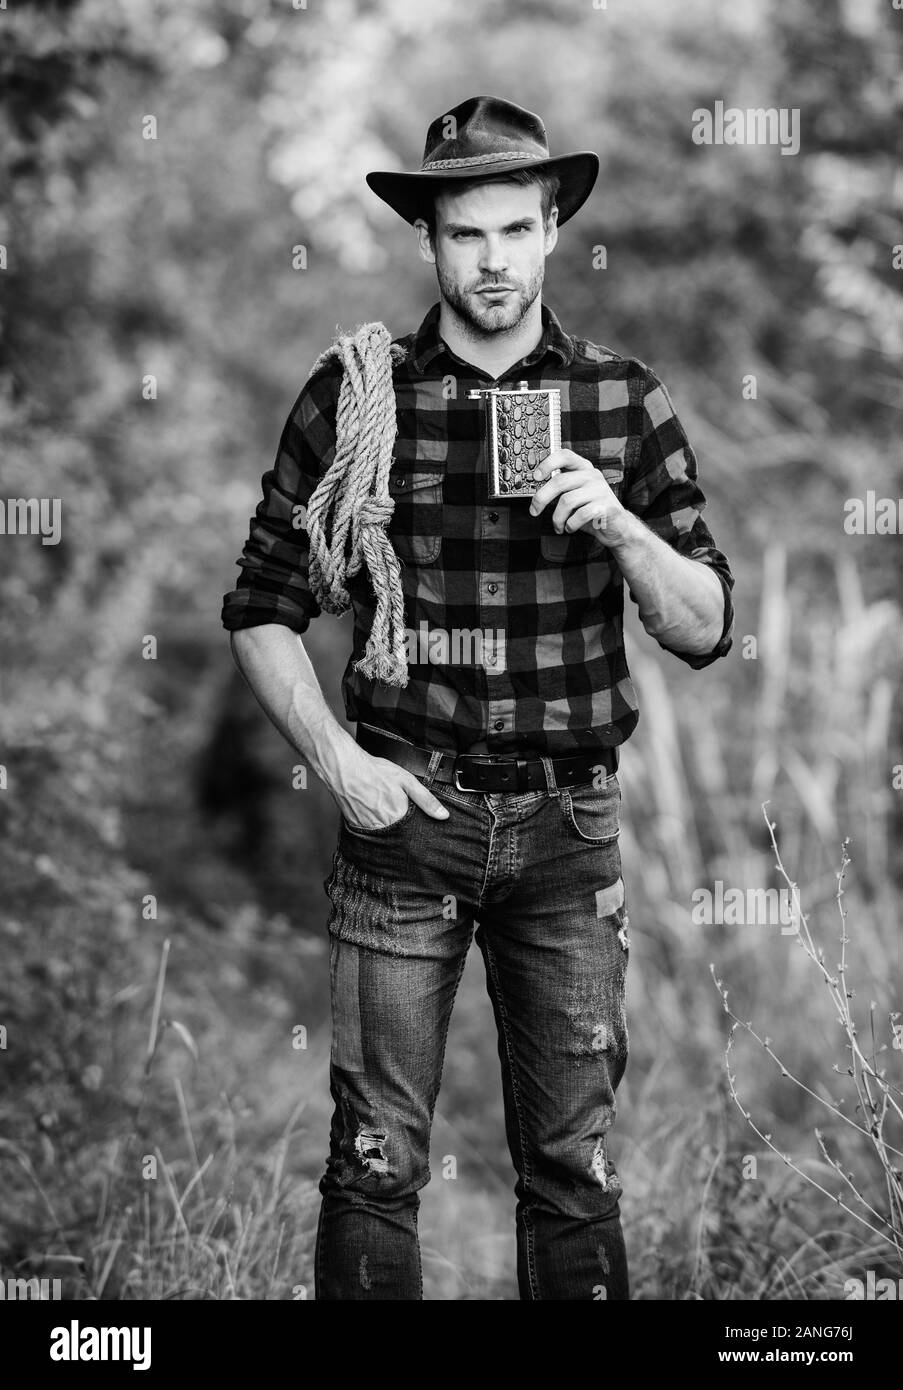 Cowboy ranch worker. Bourbon whiskey. Western culture. Man wearing hat hold rope and flask. Lasso tool American cowboy. Brutal cowboy drinking alcohol Stock Photo